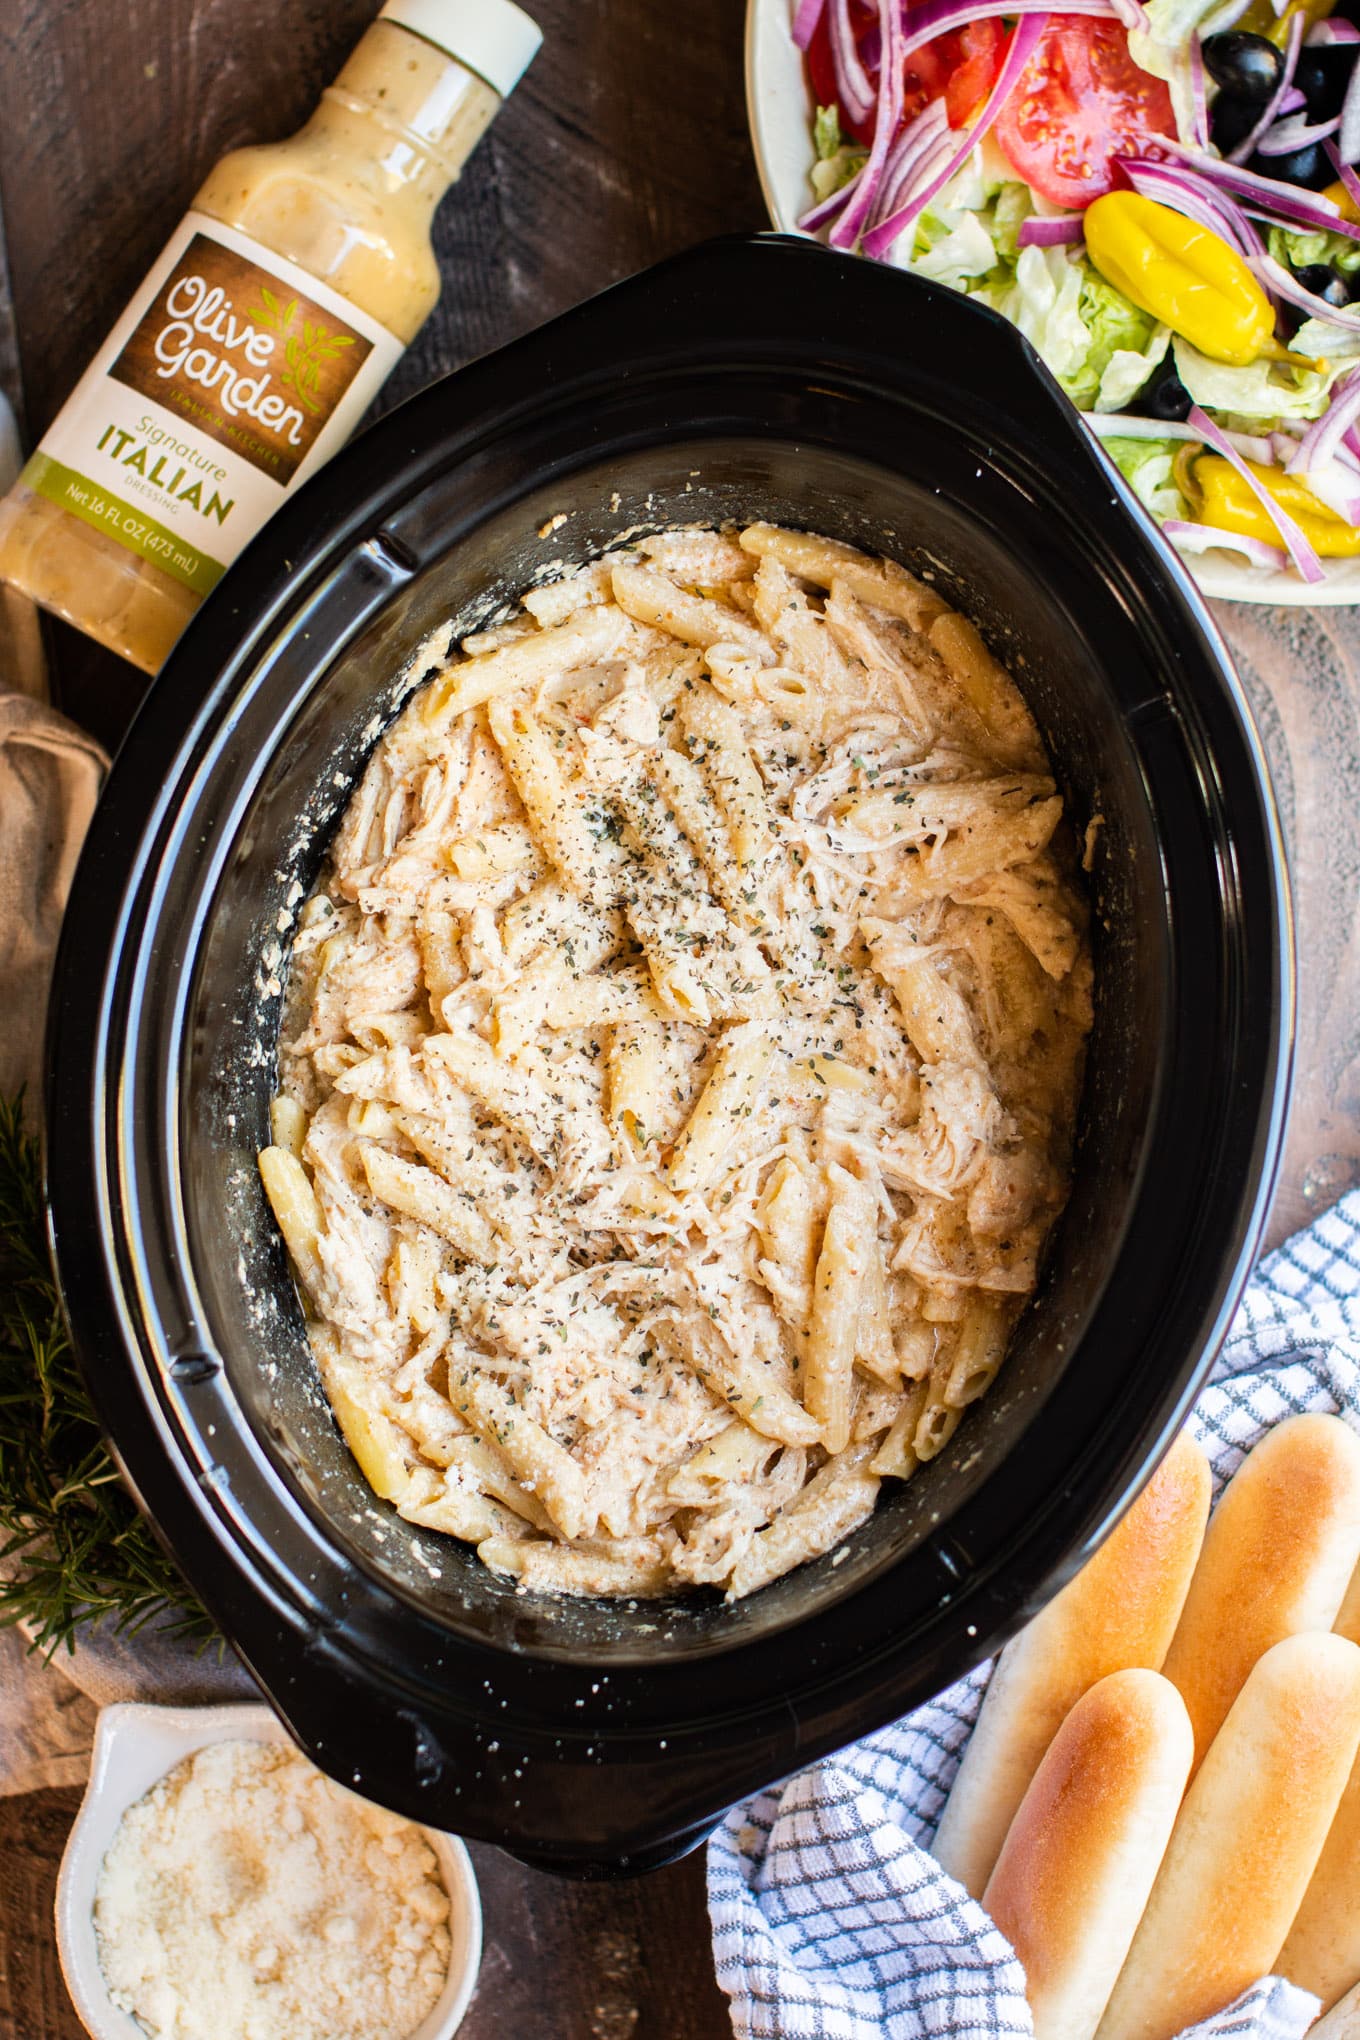 pasta in slow cooker with cheese on top. Breadsticks on the side.